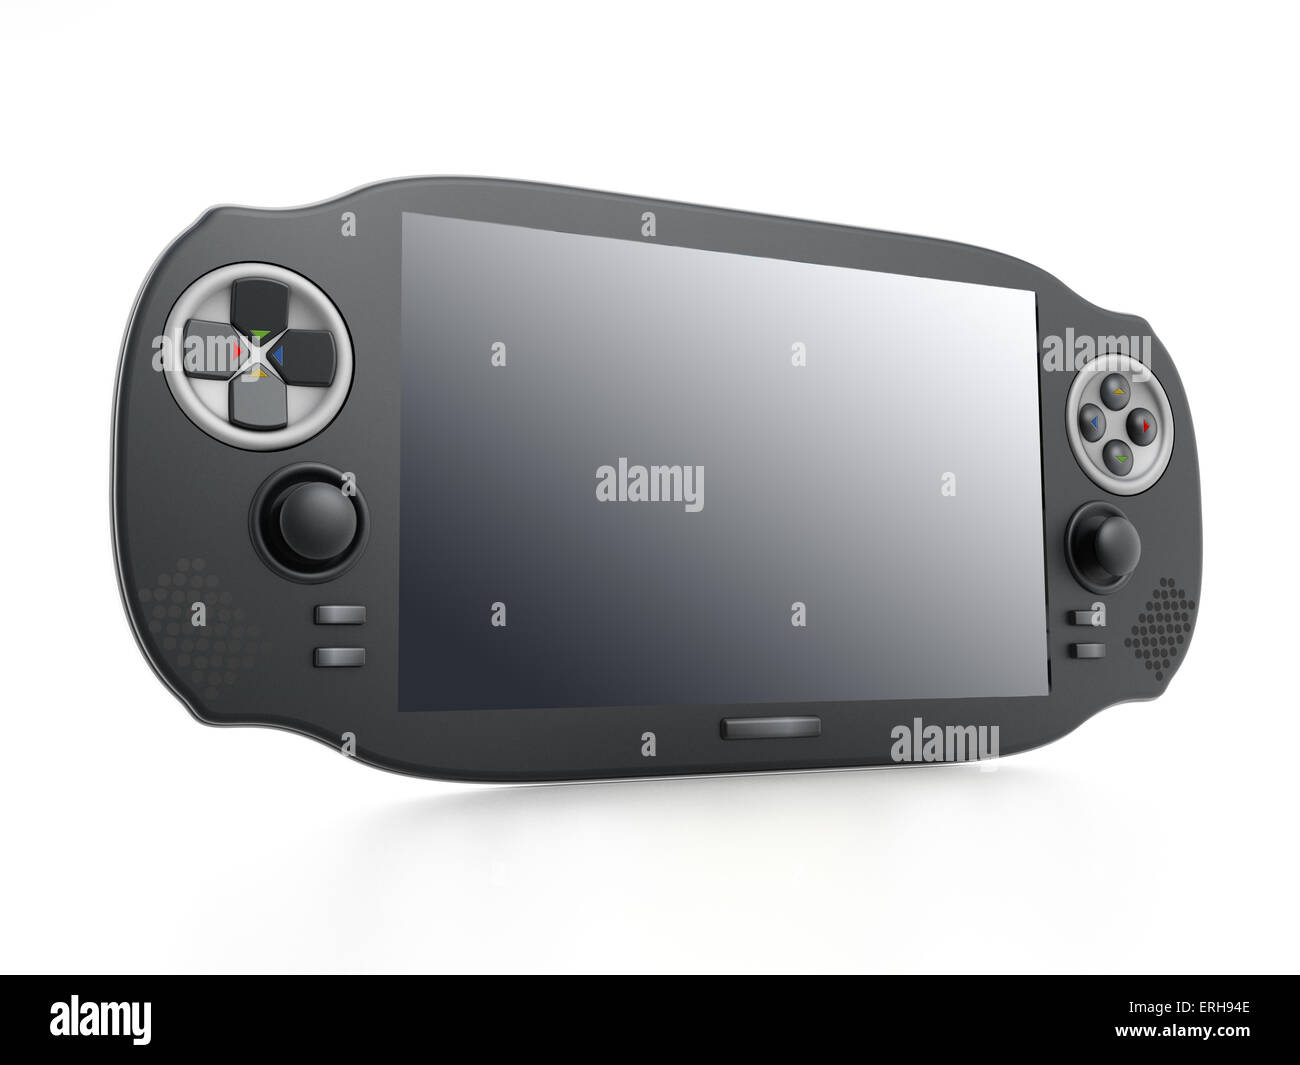 Portable video game device isolated on white. Stock Photo